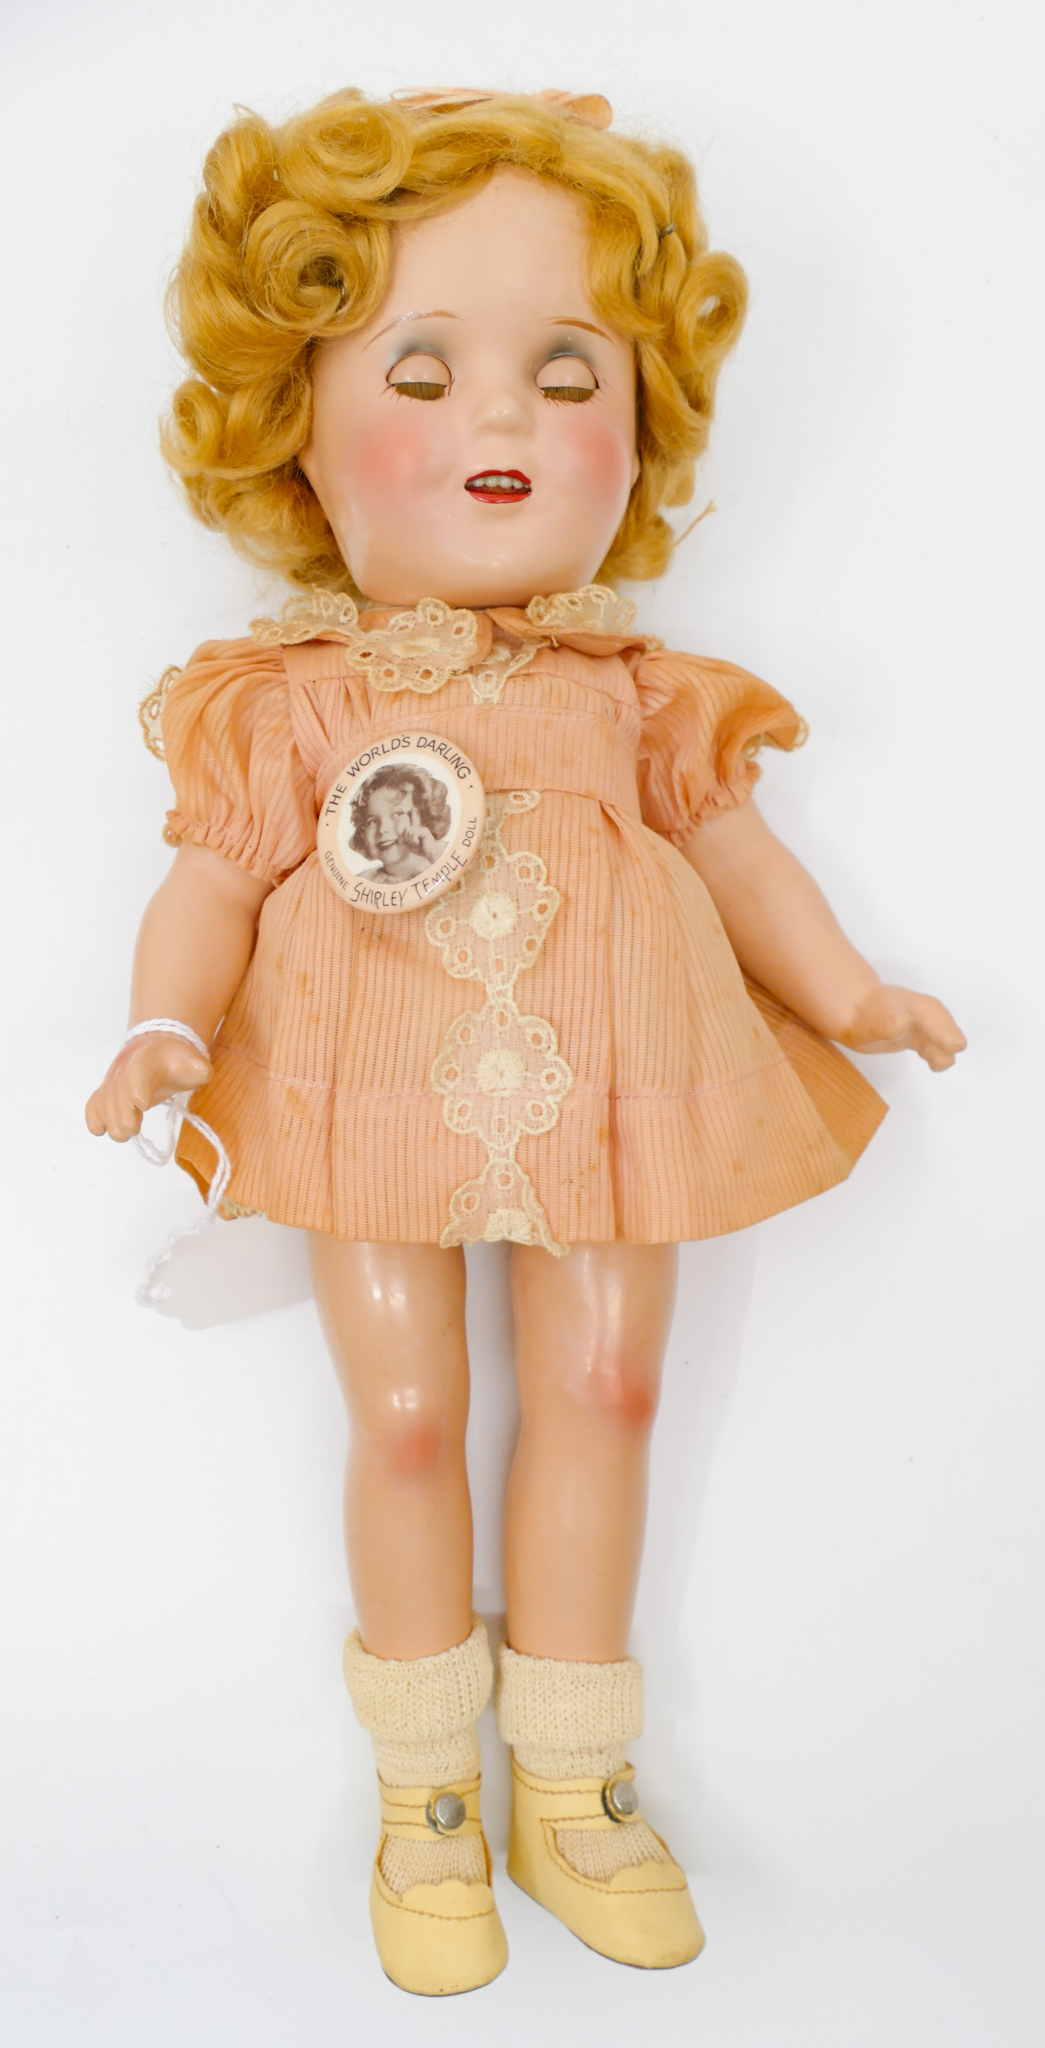 Vintage Ideal Shirley Temple Doll 2b04d4